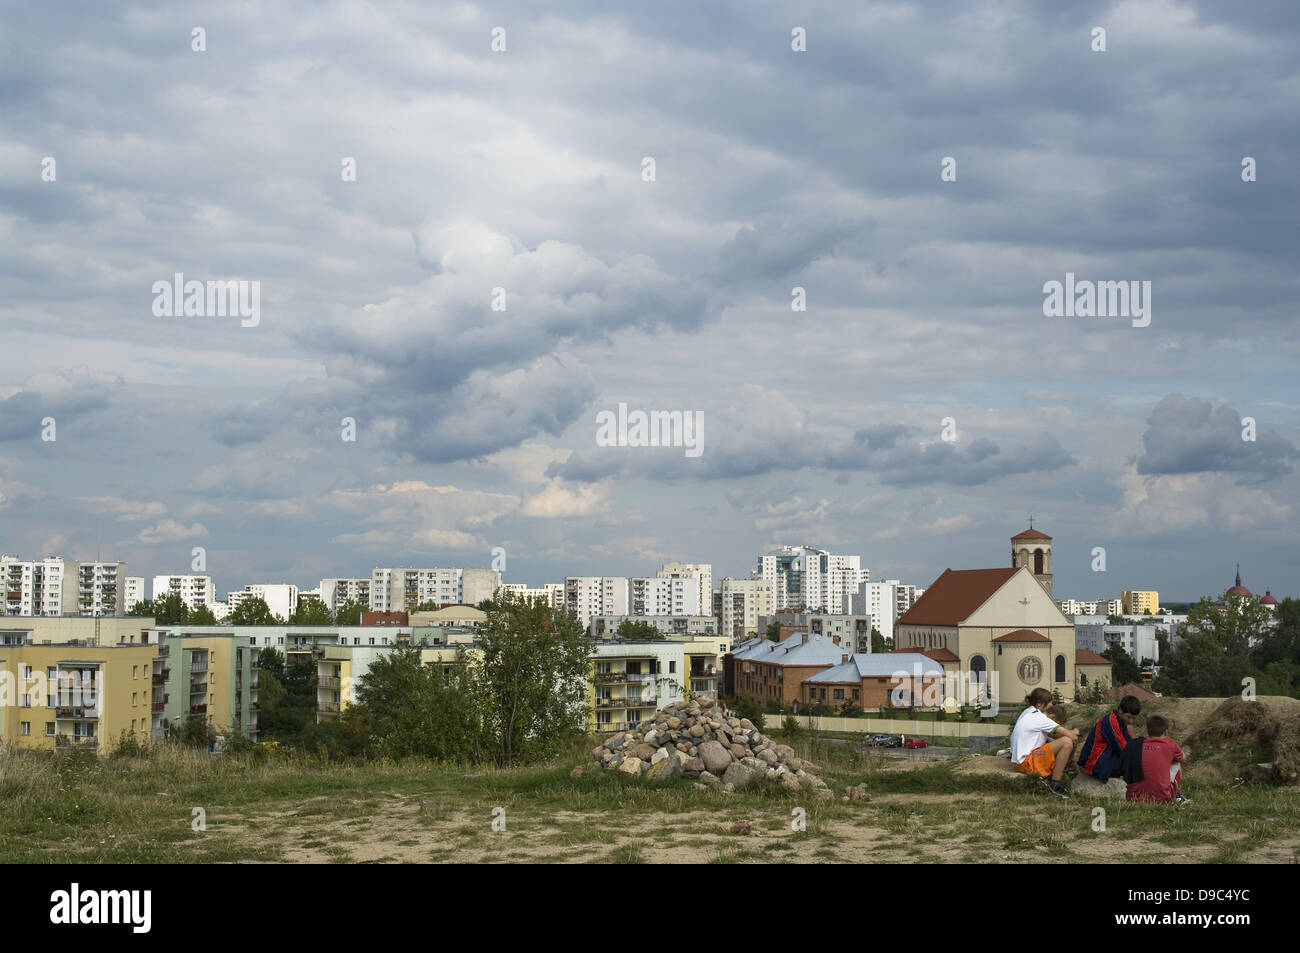 View of Kabaty district in cloudy weather, Warsaw, Poland Stock Photo